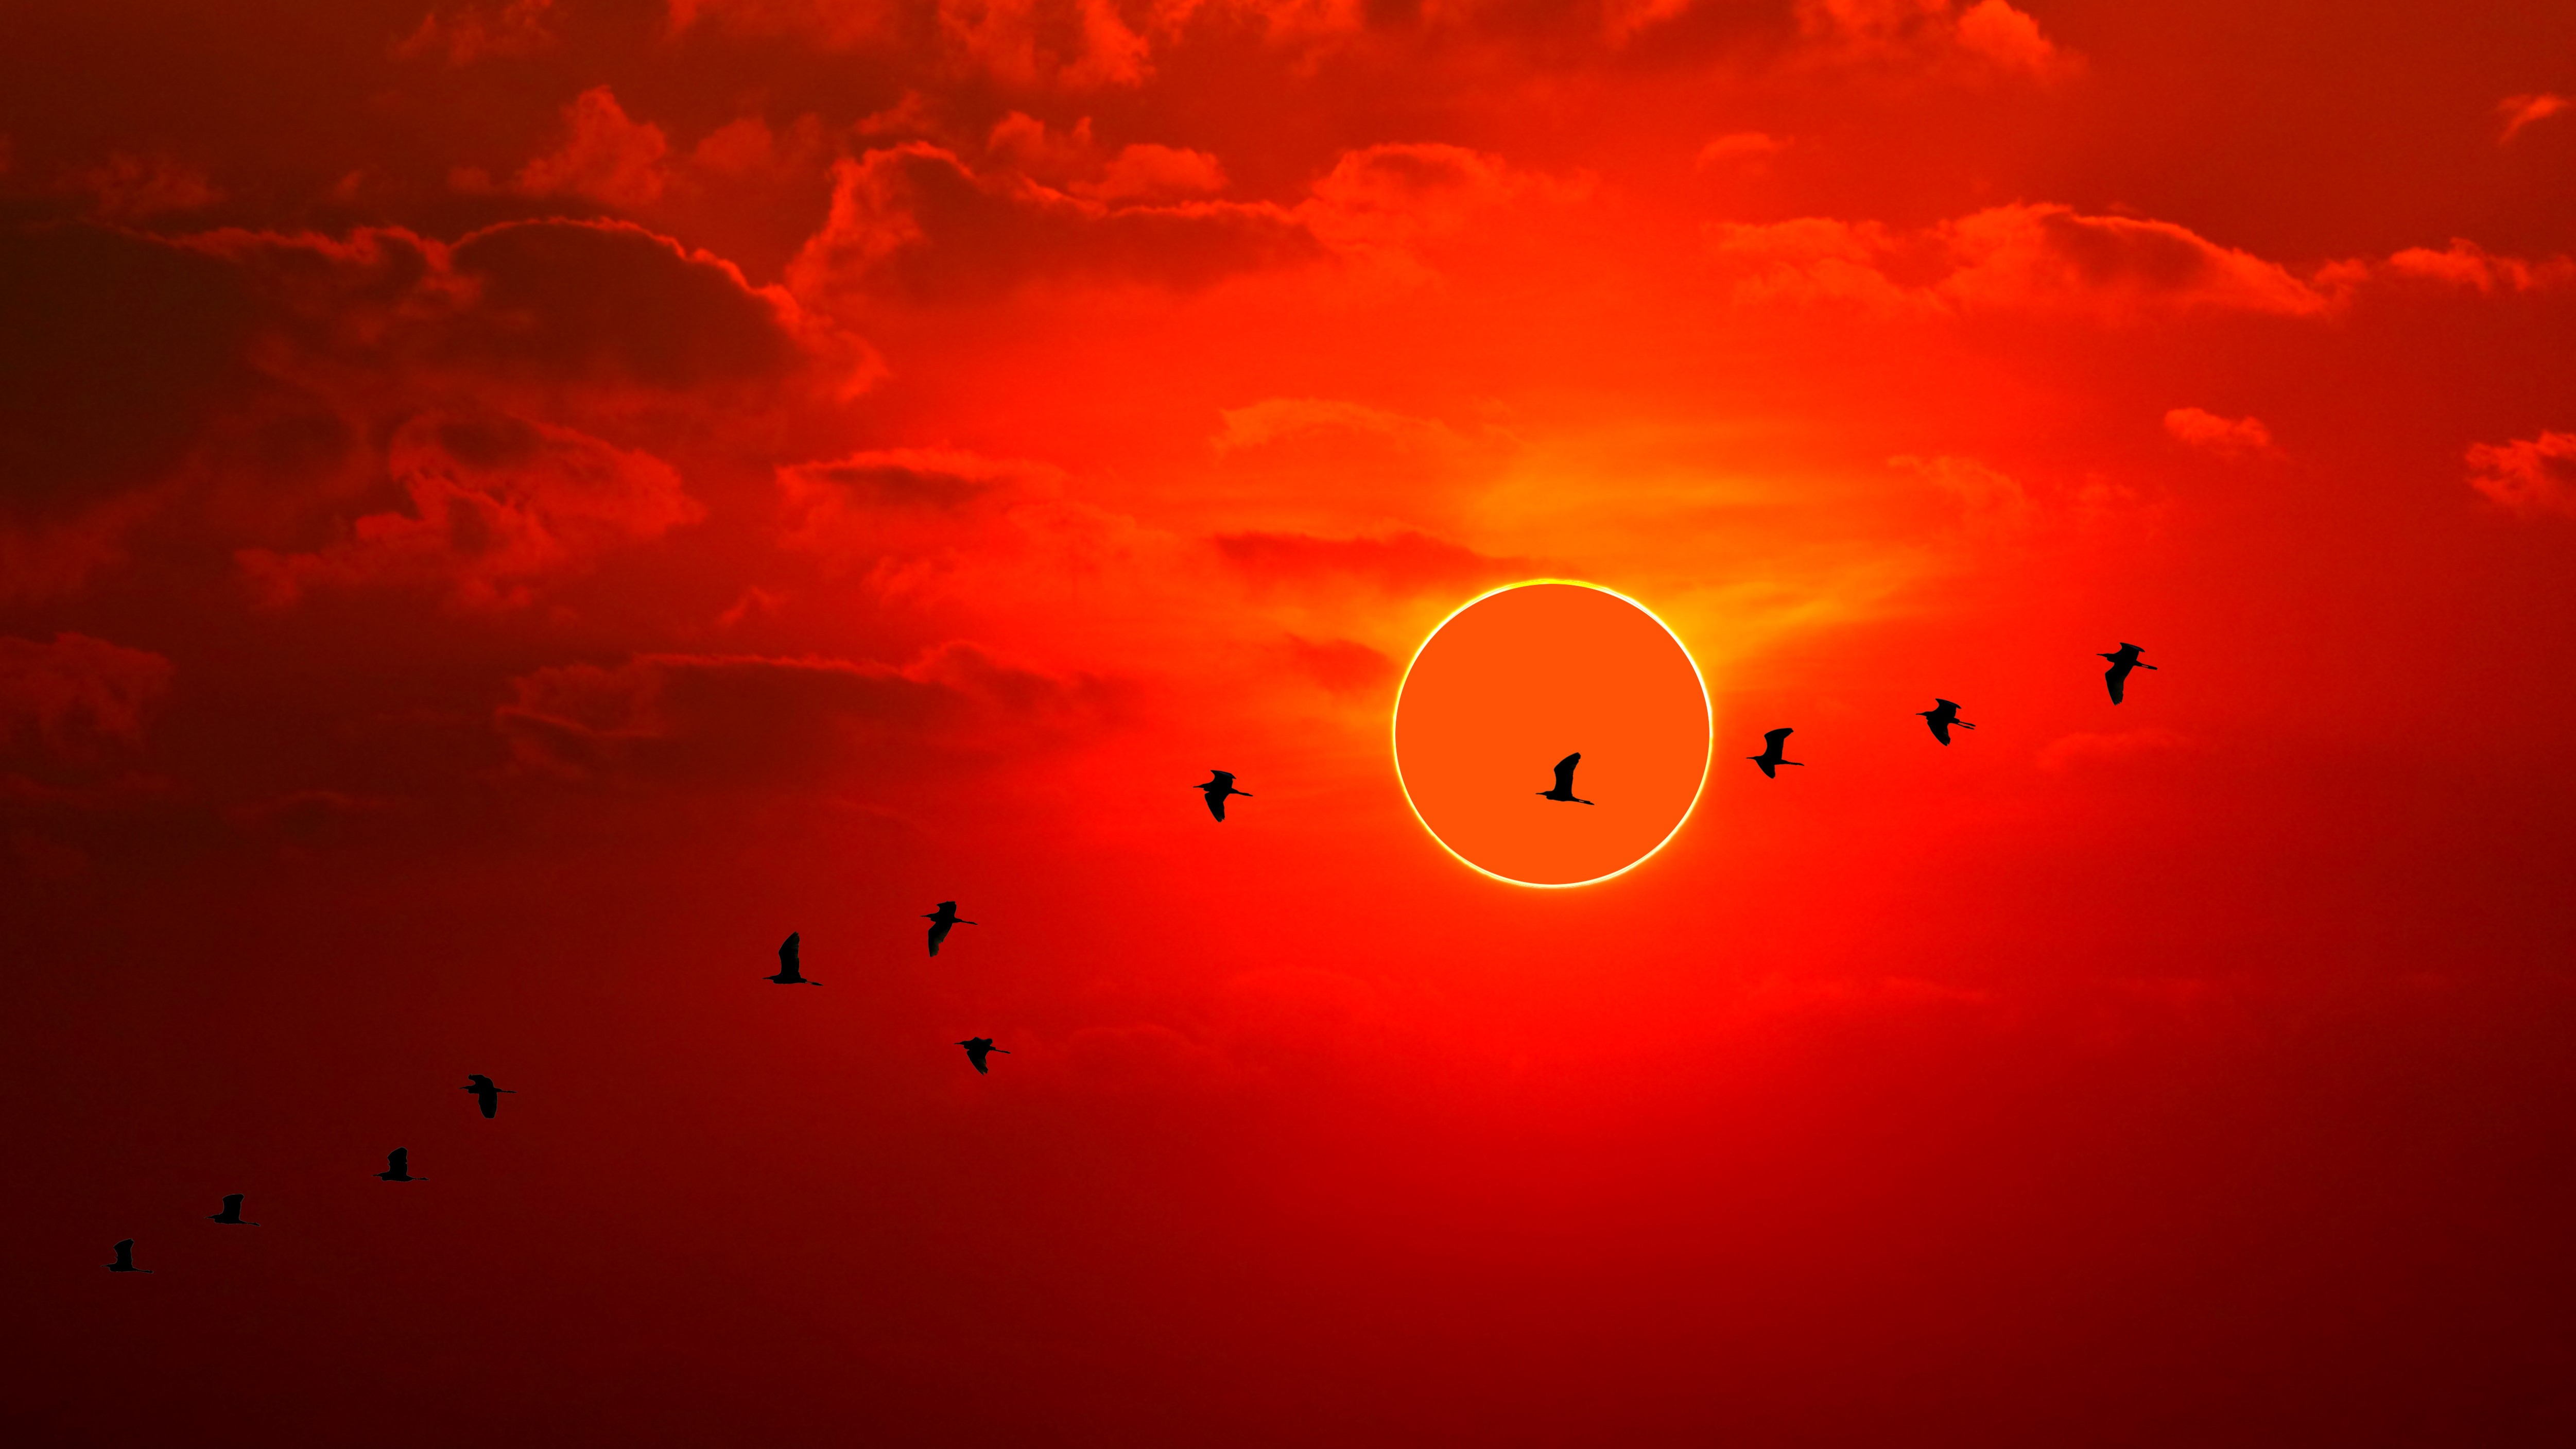 an annular solar eclipse at sunset with a blood red sky and a flock of birds are silhouetted as they fly across the scene in the foreground.